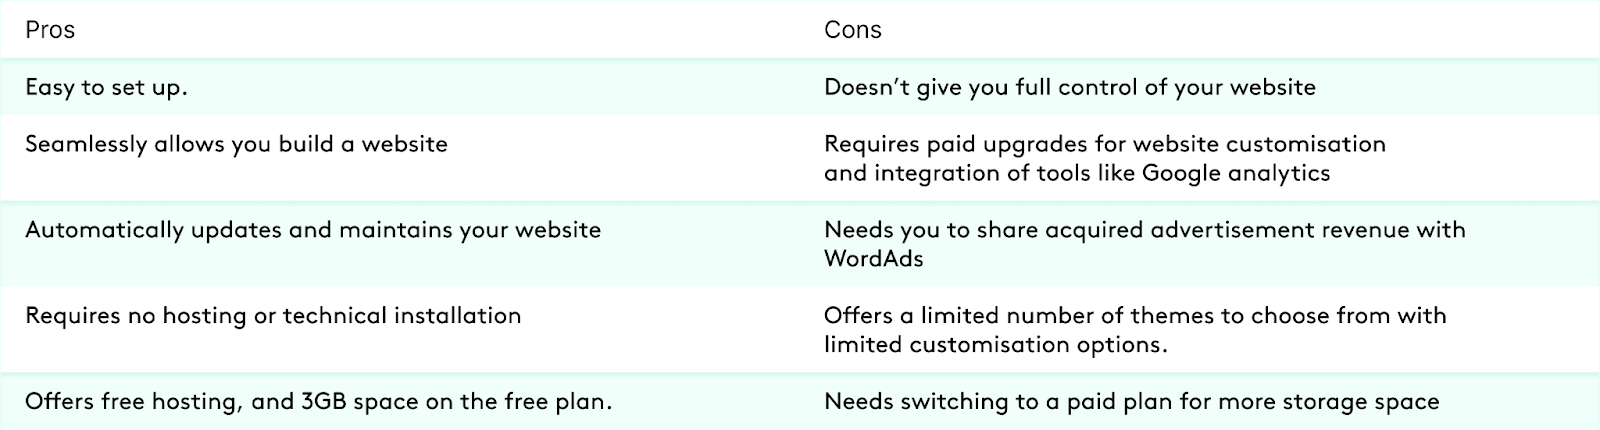 Pros and cons of using WordPress.com